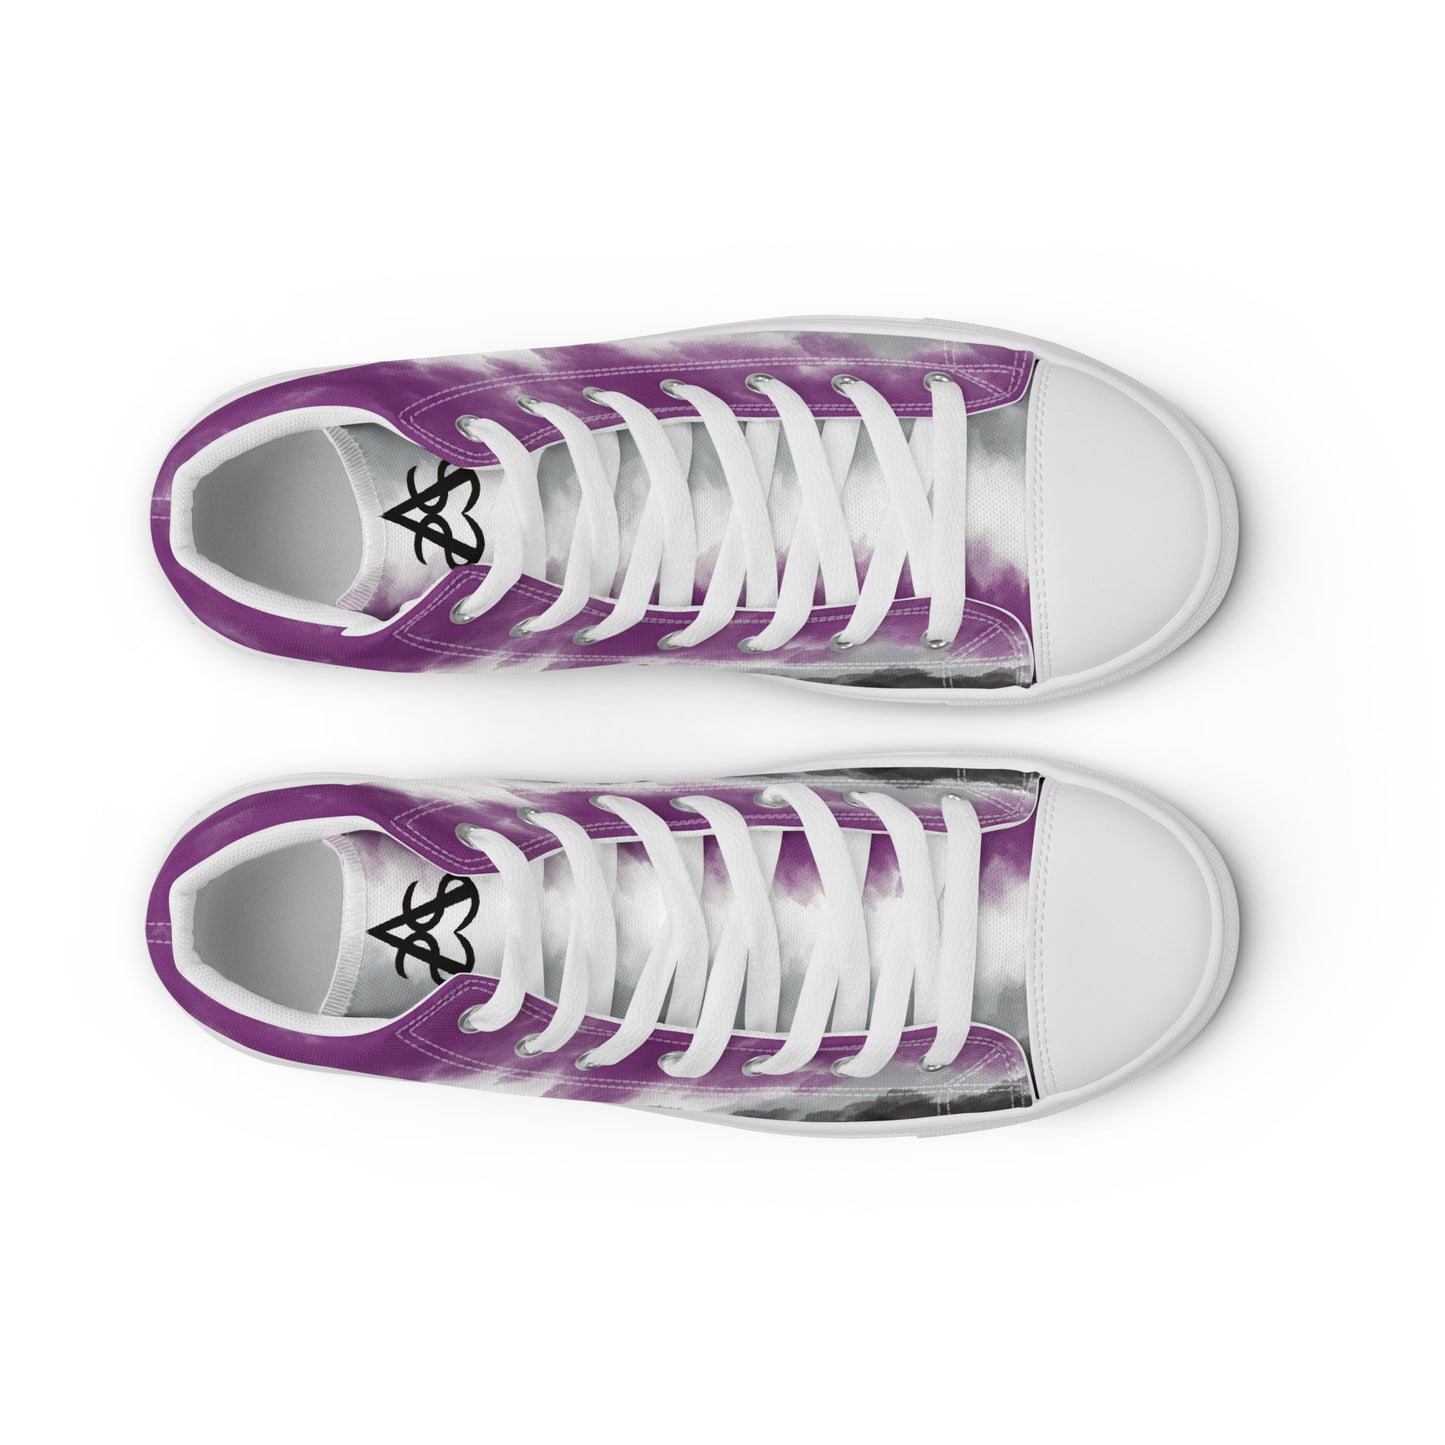 Top view: a pair of high top shoes with clouds in the asexual flag colors, a hand drawn white heart on the heel, white laces and accents, and the Aras Sivad Studio logo on the tongue.